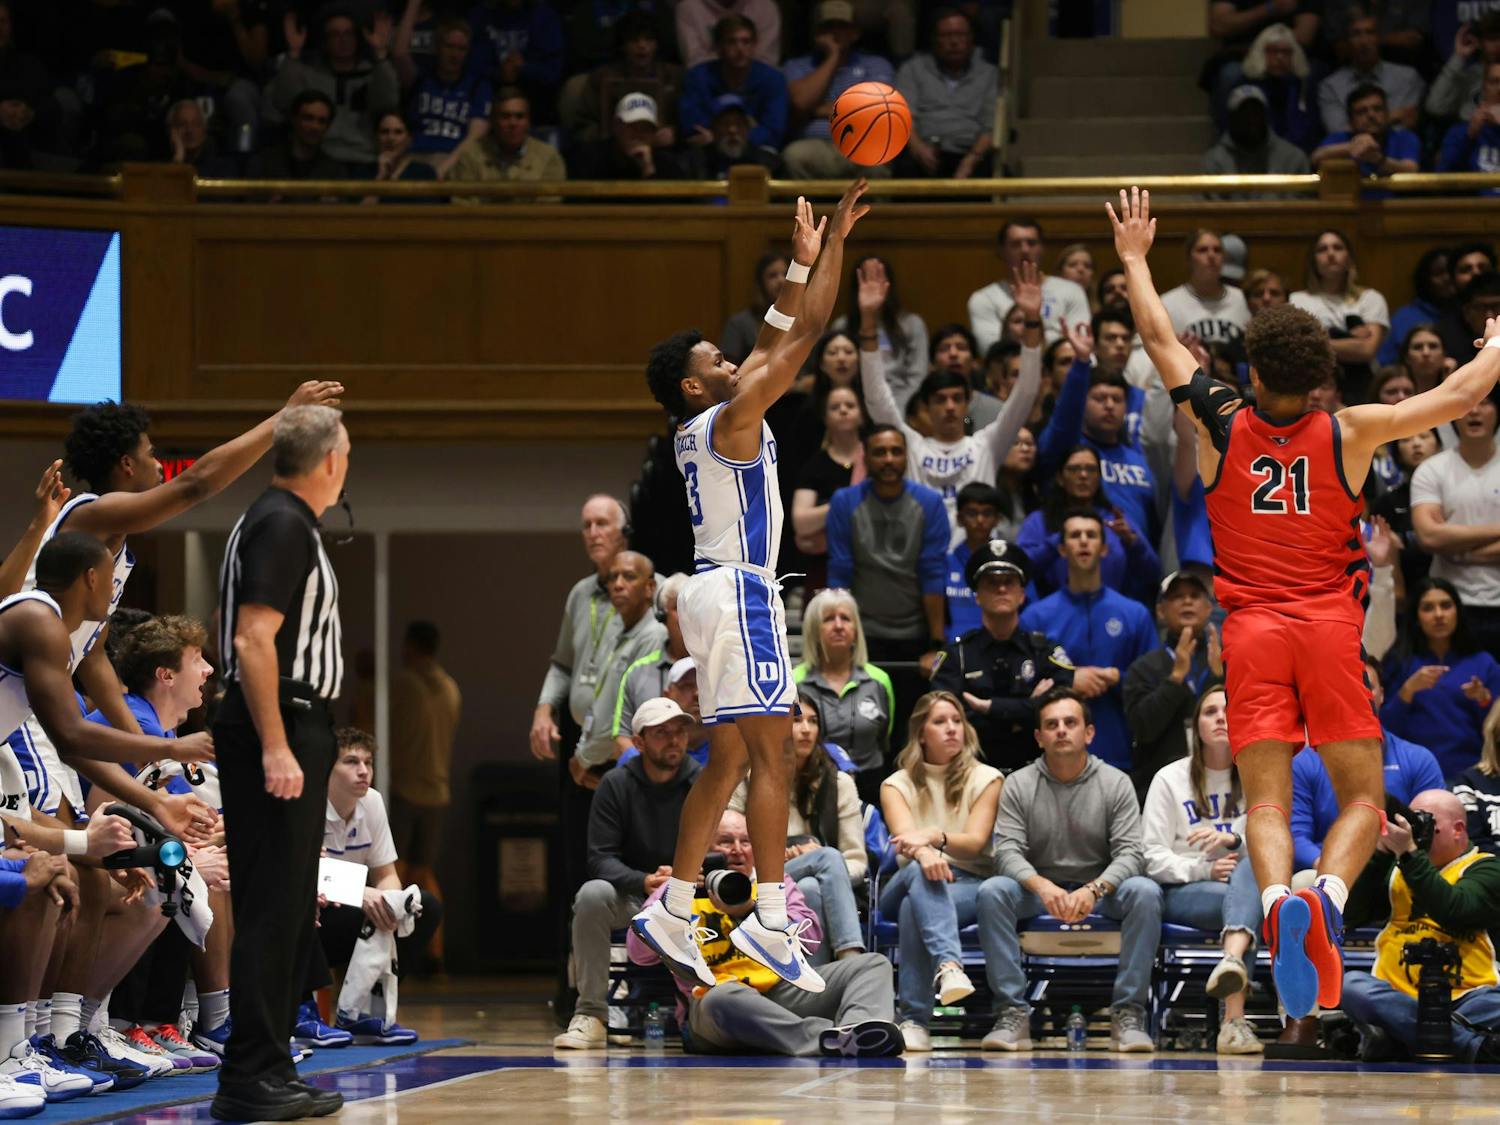 Jeremy Roach lets loose a three during Duke's win against Southern Indiana.